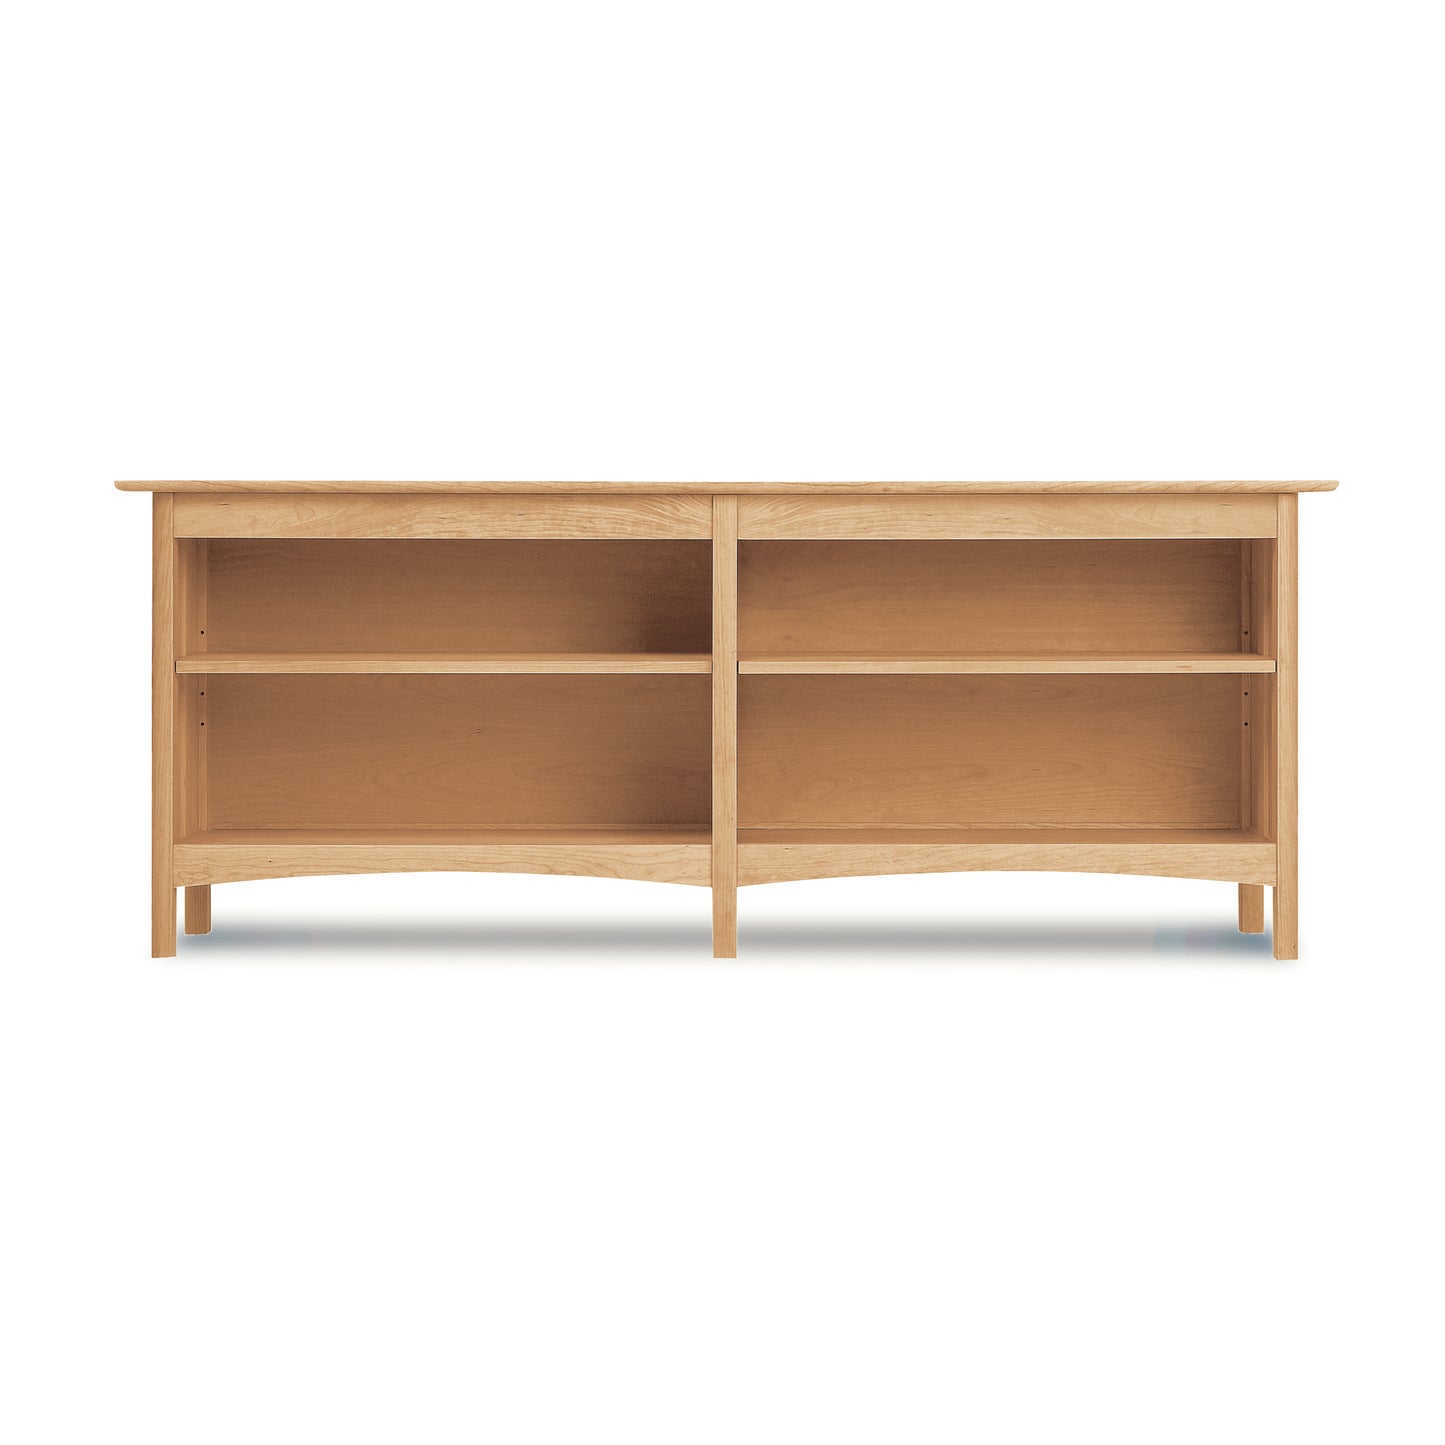 Empty Heartwood Shaker Open Console Bookcase with open shelving, isolated on a white background. (Brand: Vermont Furniture Designs)